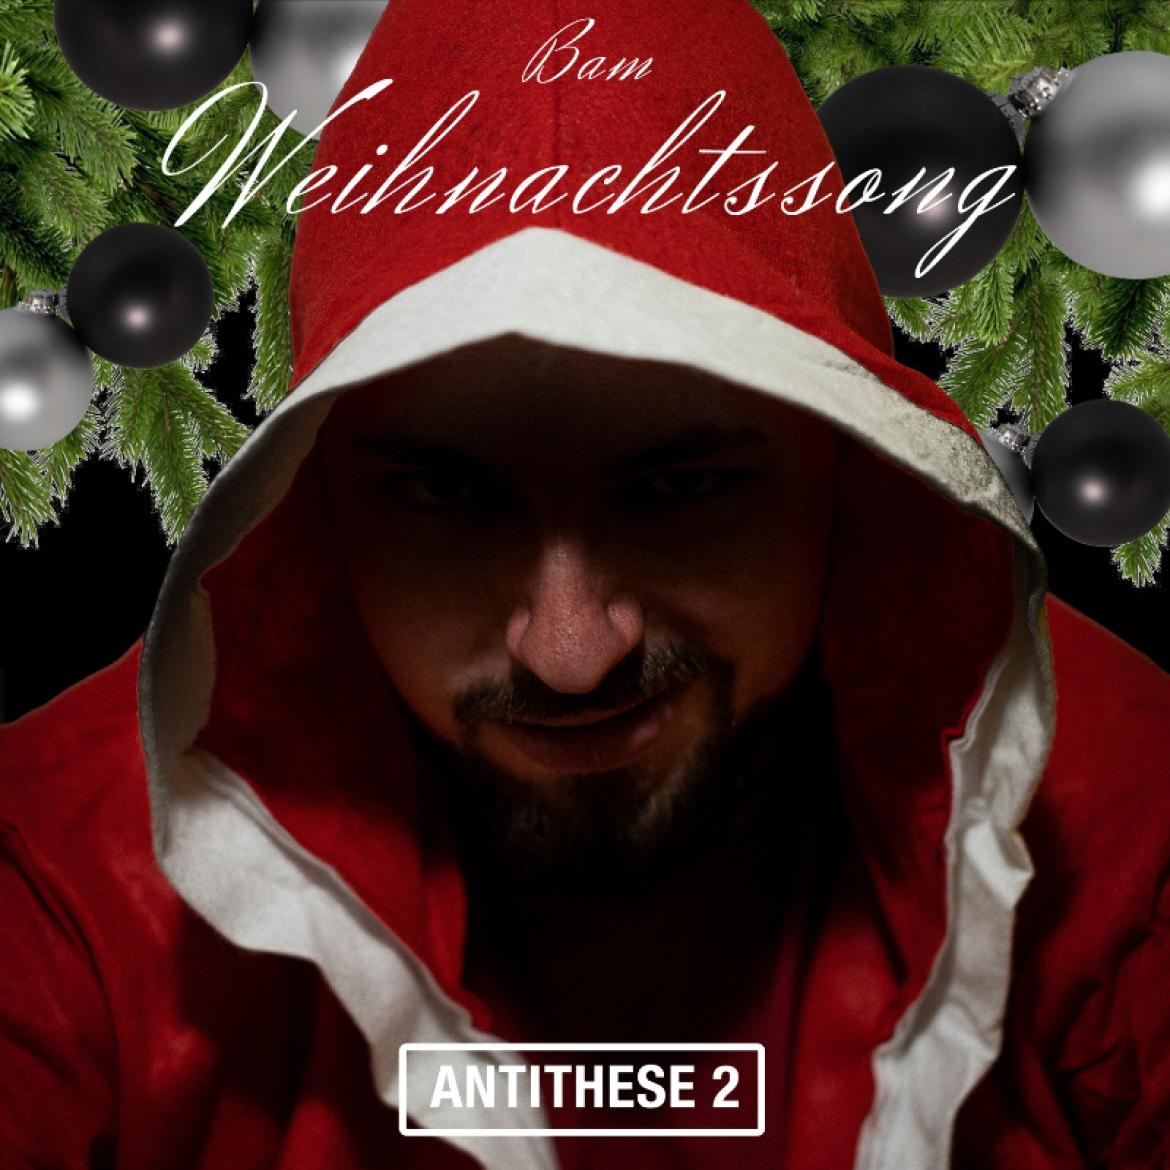 Bam's Weihnachtssong Cover